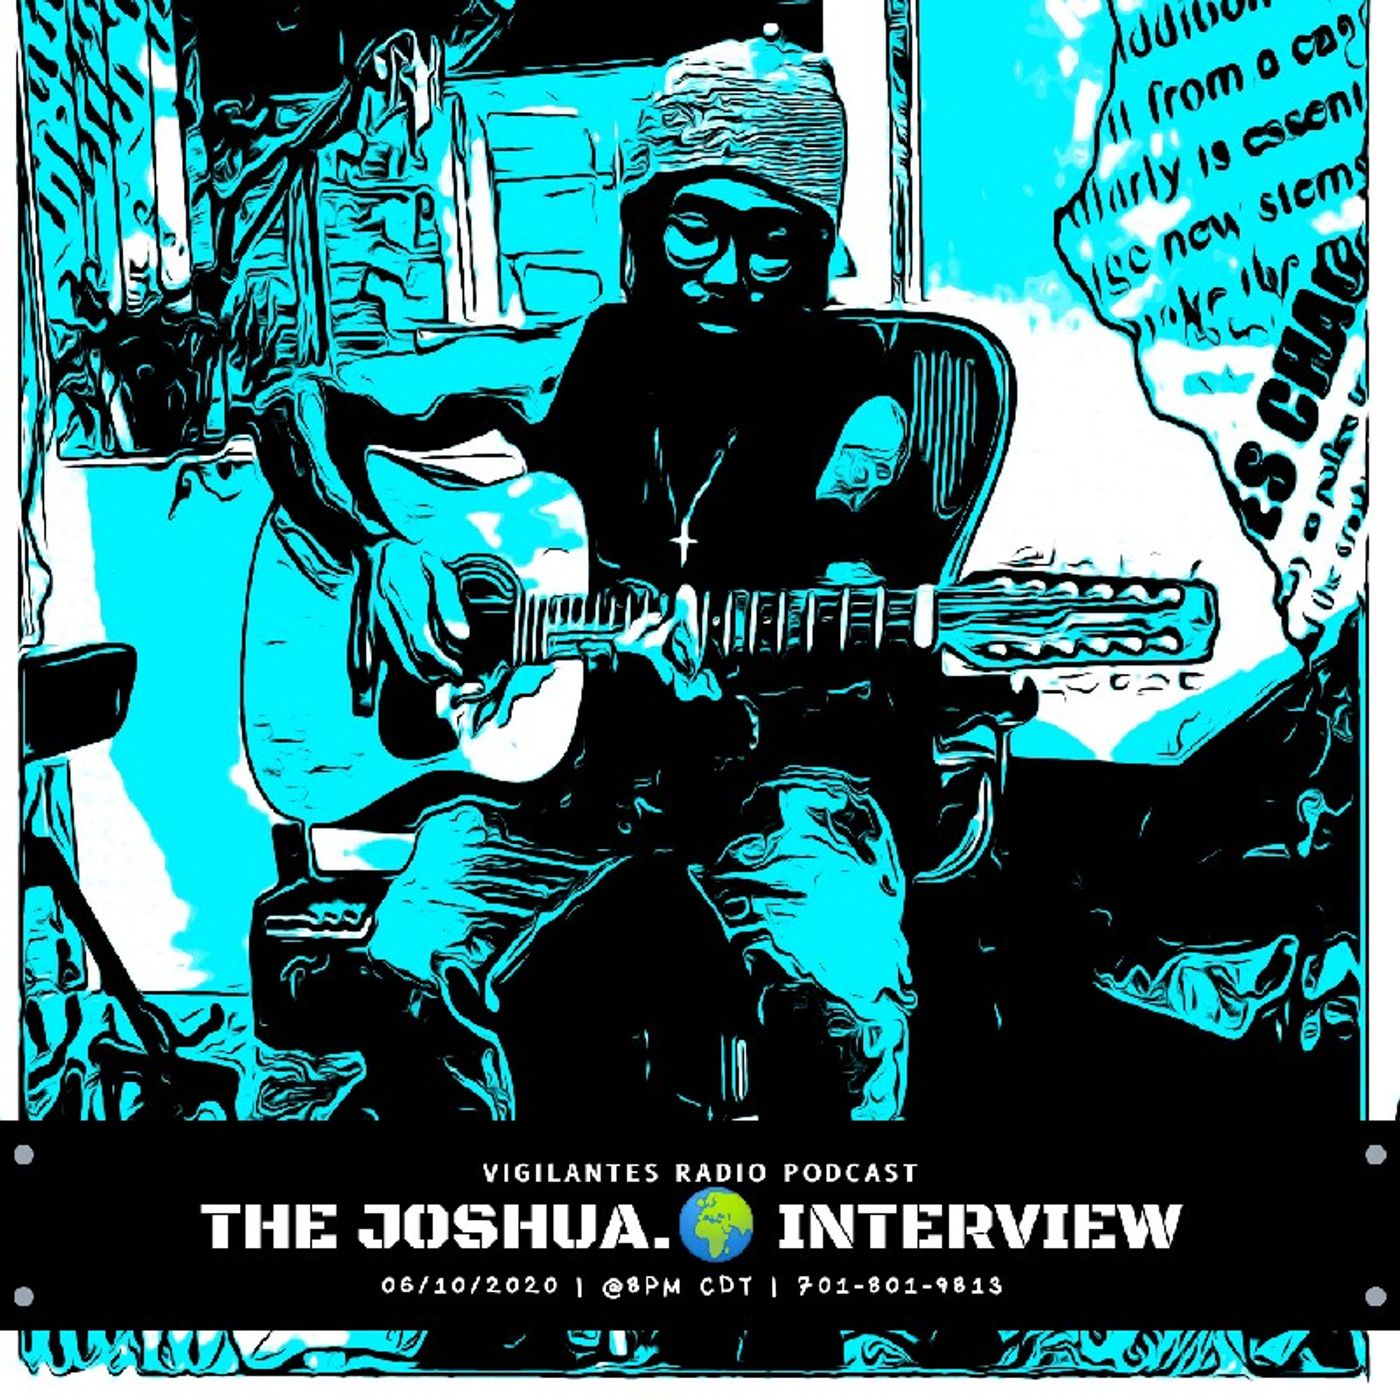 The Joshua. Interview. Image